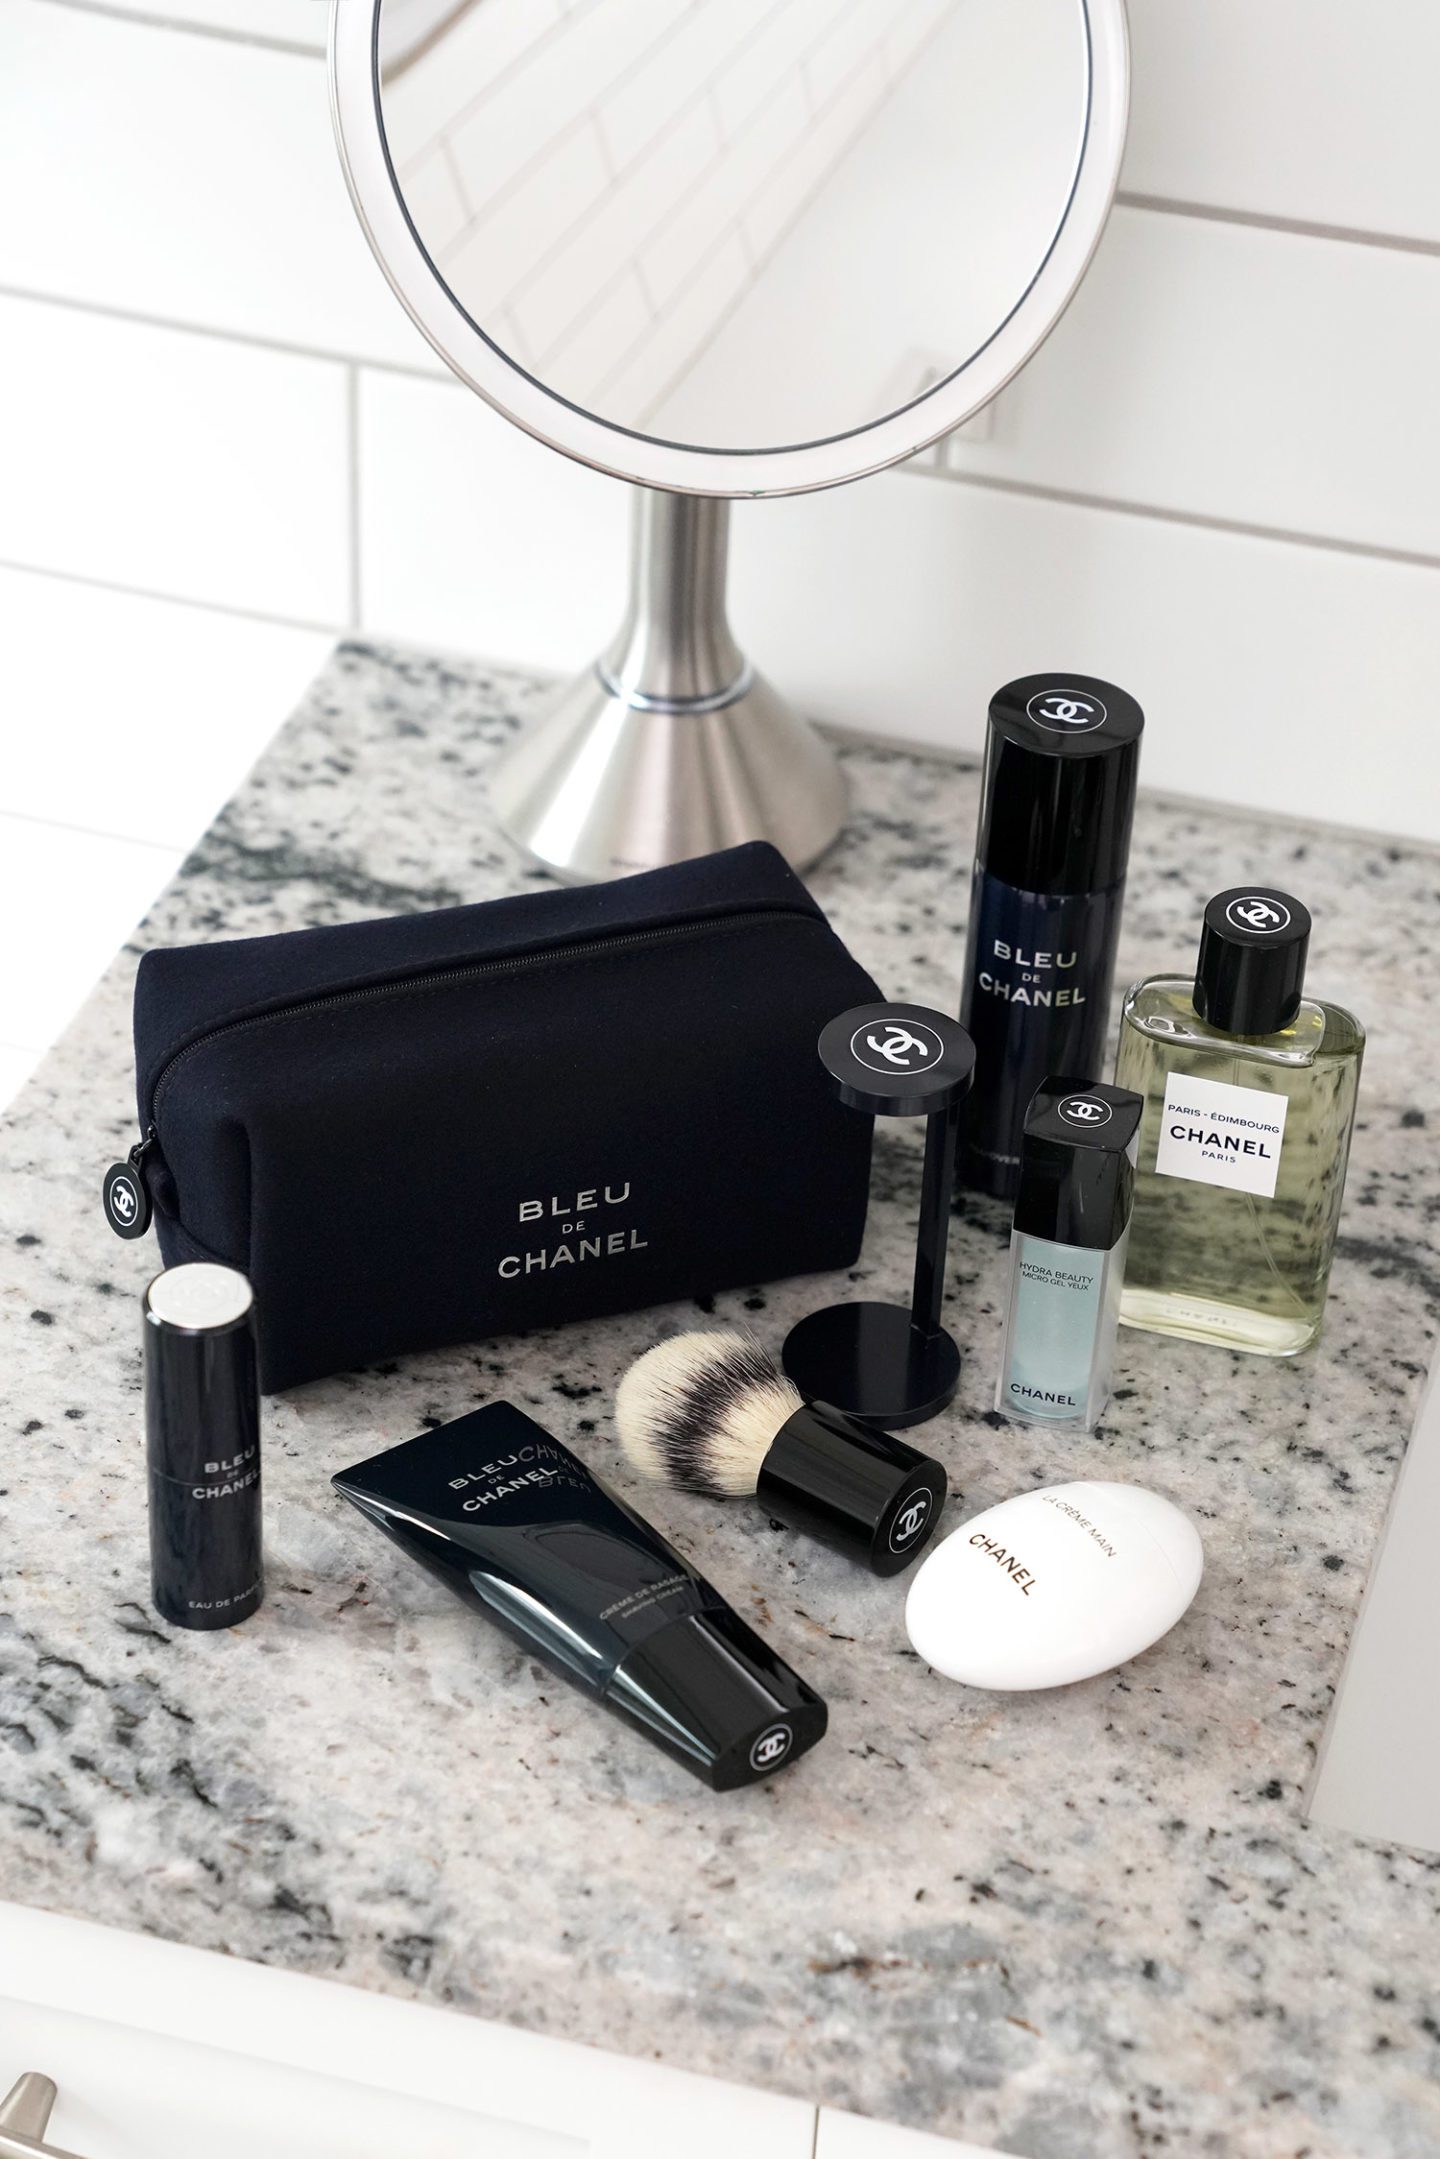 Chanel Gift Ideas Fathers Day